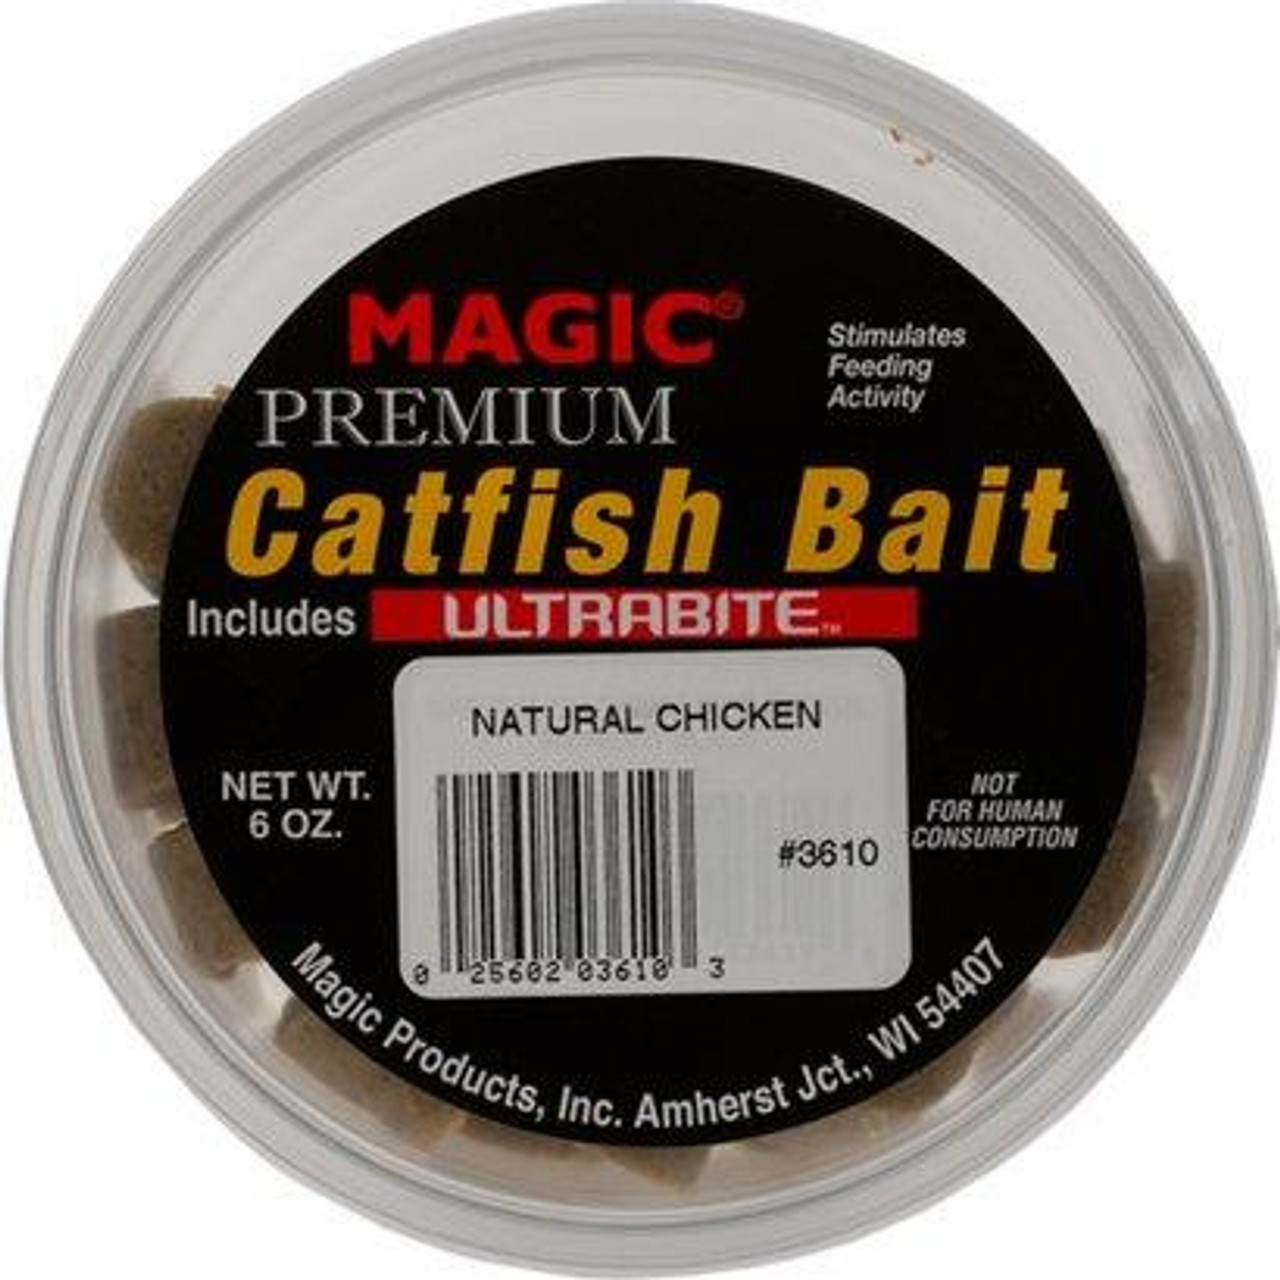 https://cdn11.bigcommerce.com/s-stfpjhht/images/stencil/1280x1280/products/17623/35050/Magic-Products-Premium-Catfish-Baits-025602036103_image1__98580.1553026810.jpg?c=2